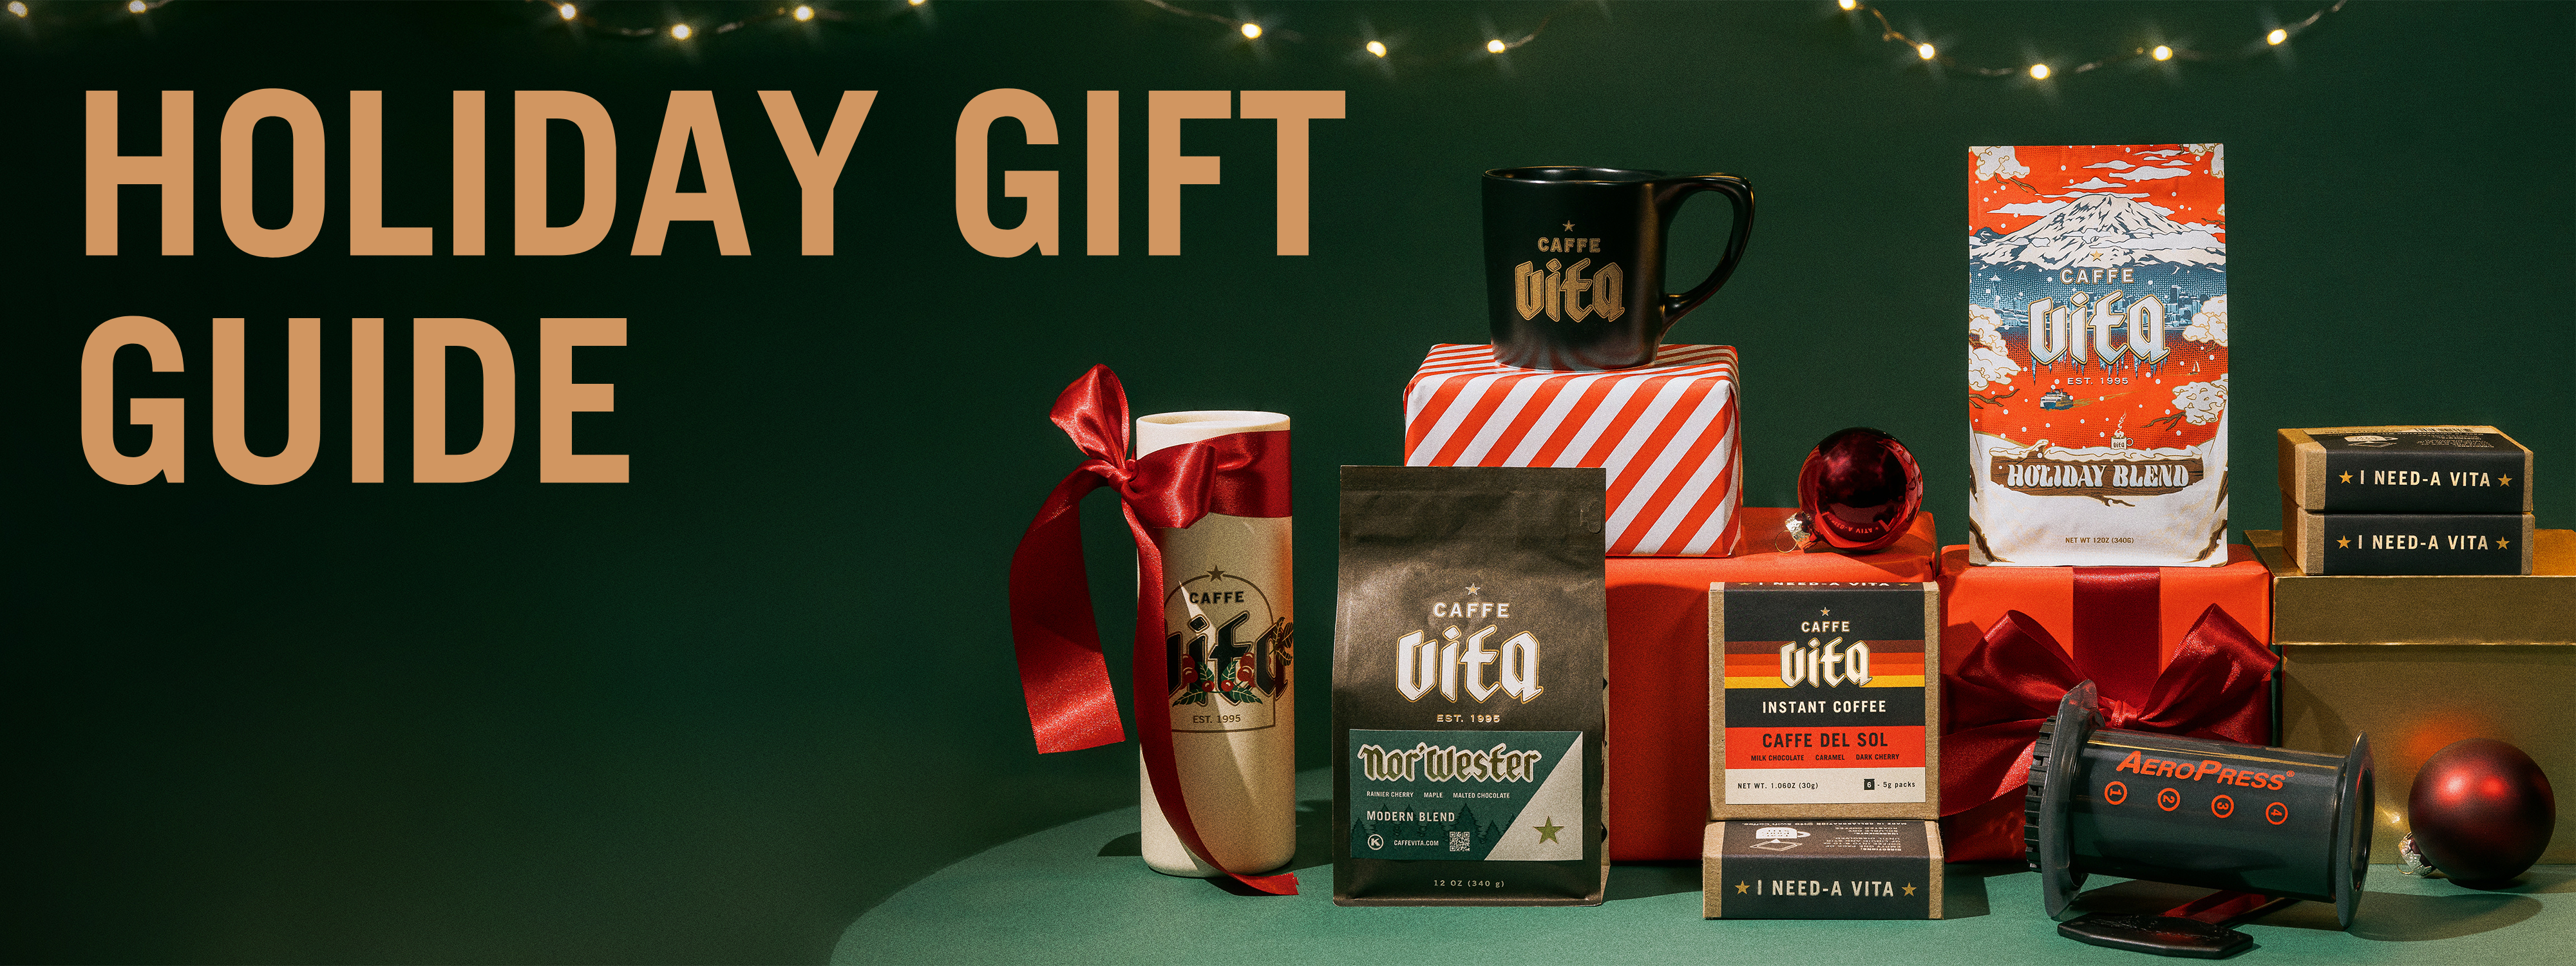 Bonifacio High Street - The perfect Holiday Gift this Holiday is love in  the form of coffee. ☕️ Make this year's holiday extra special with these Nespresso  gift sets. Get any of